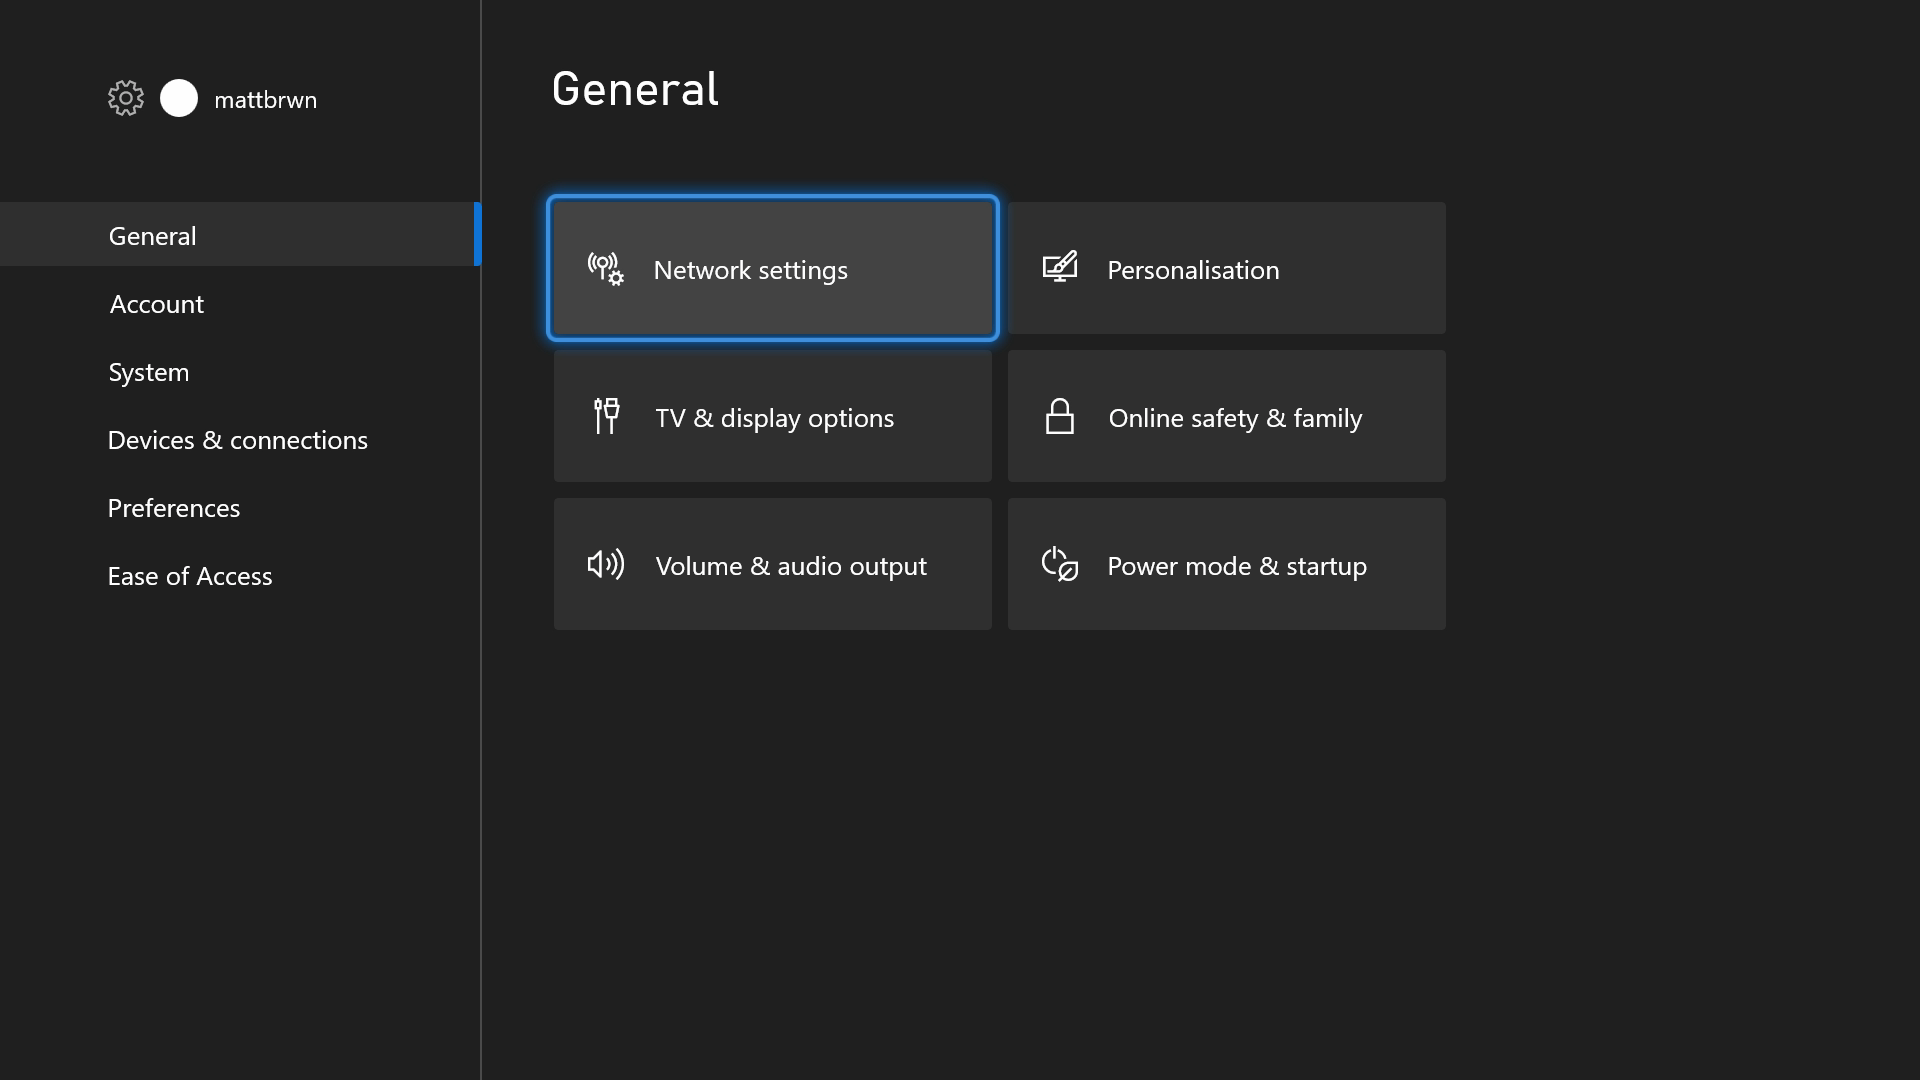 Xbox Series X|S Networking Guide